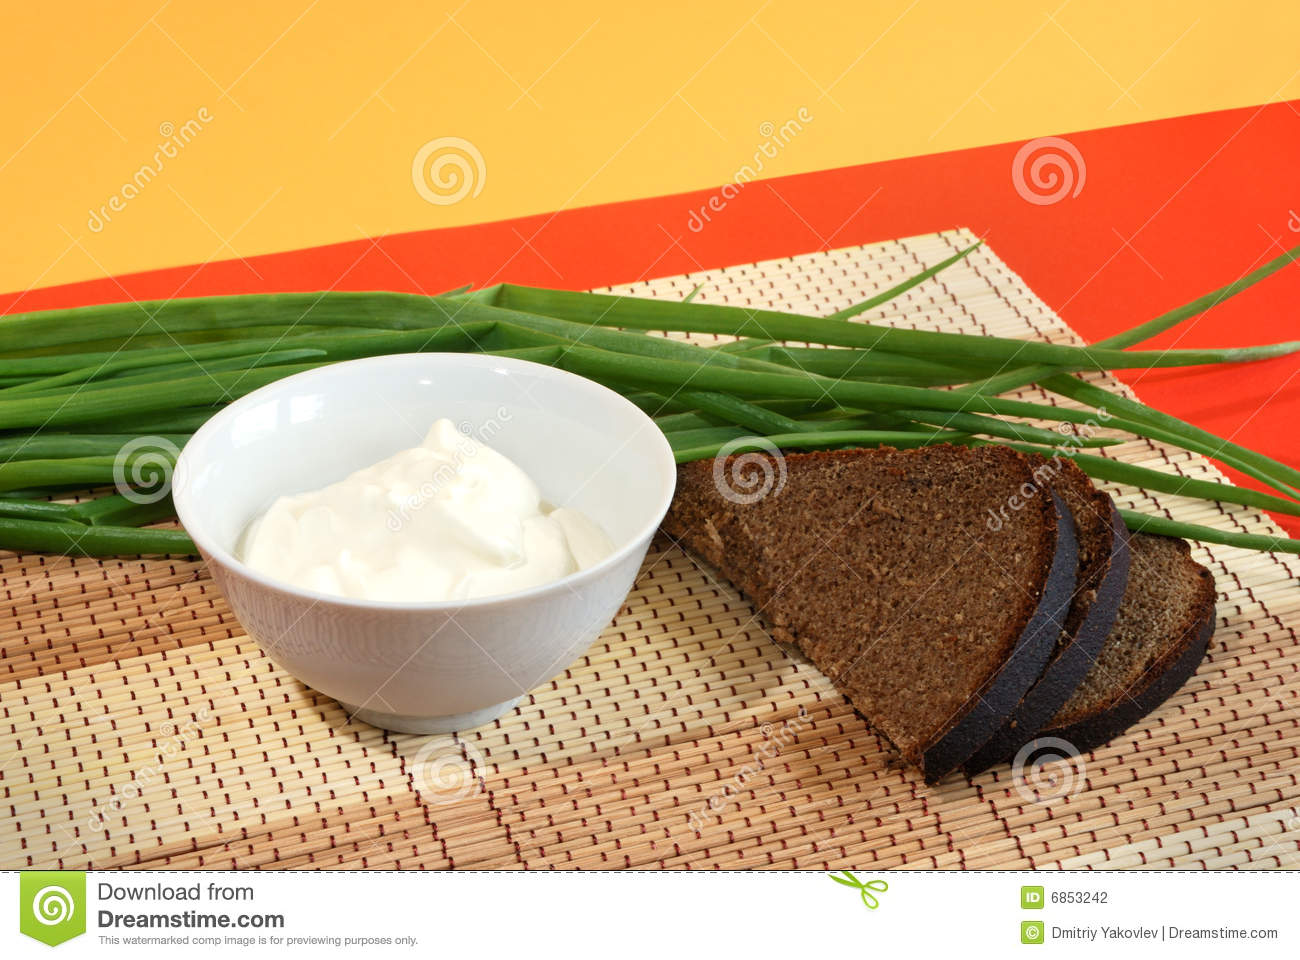 Sour Cream Rye Bread And Spring Onions Stock Photography   Image    